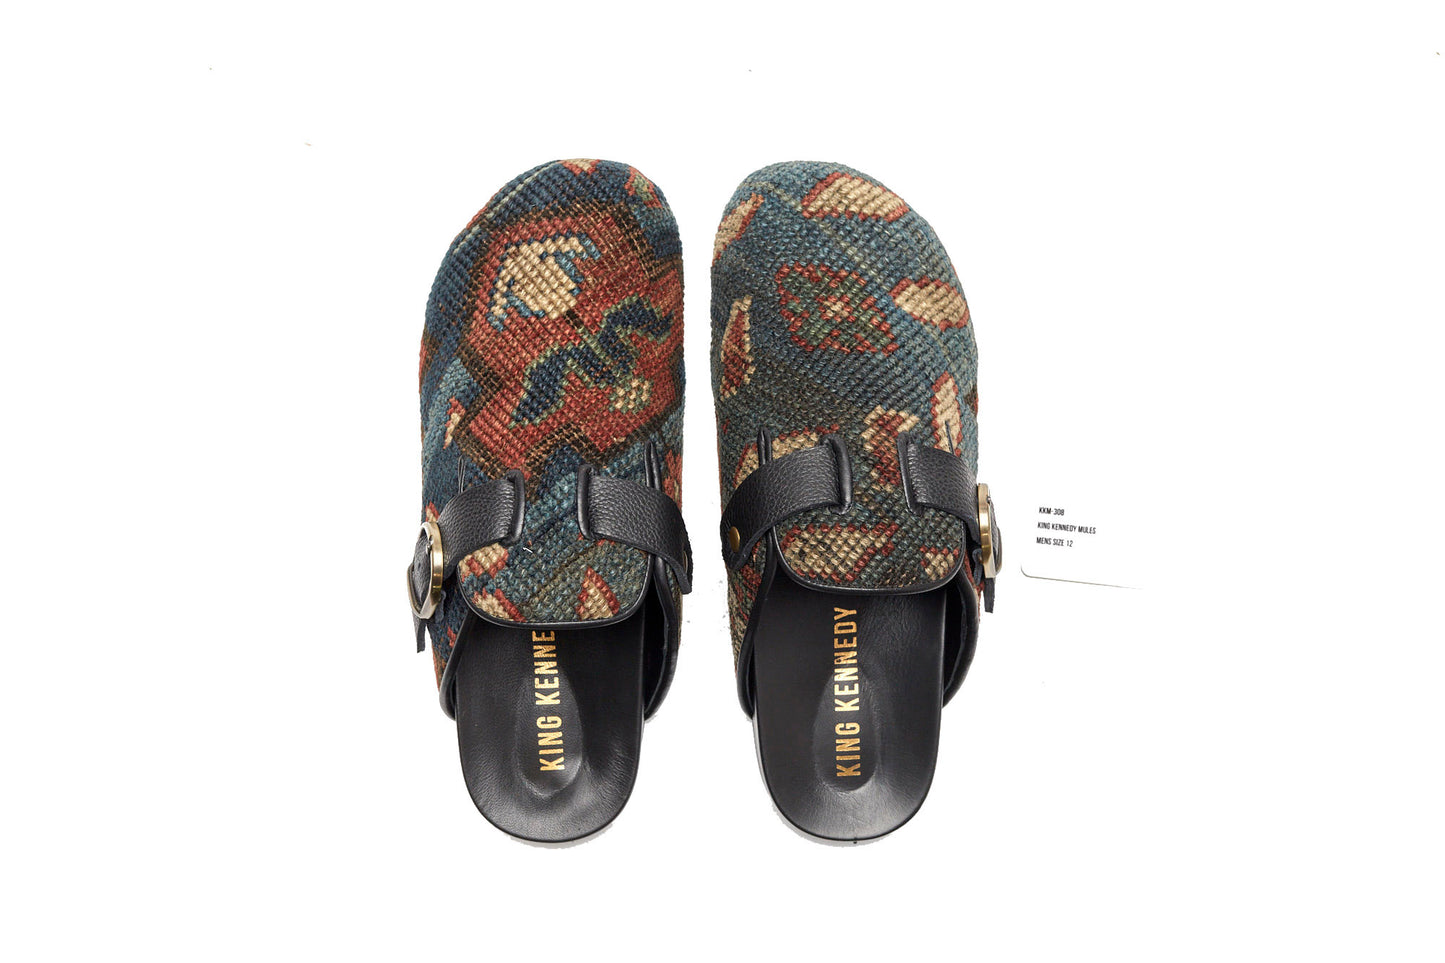 King Kennedy Rug Mules are one-of-a-kind and made of 100 year old antique Persian rug fragments with soft lambskin footbed and comfortable rubber sole. This pair is made of a beautifully faded antique Persian rug featuring a blue base with pale red, cream and green floral motifs. 